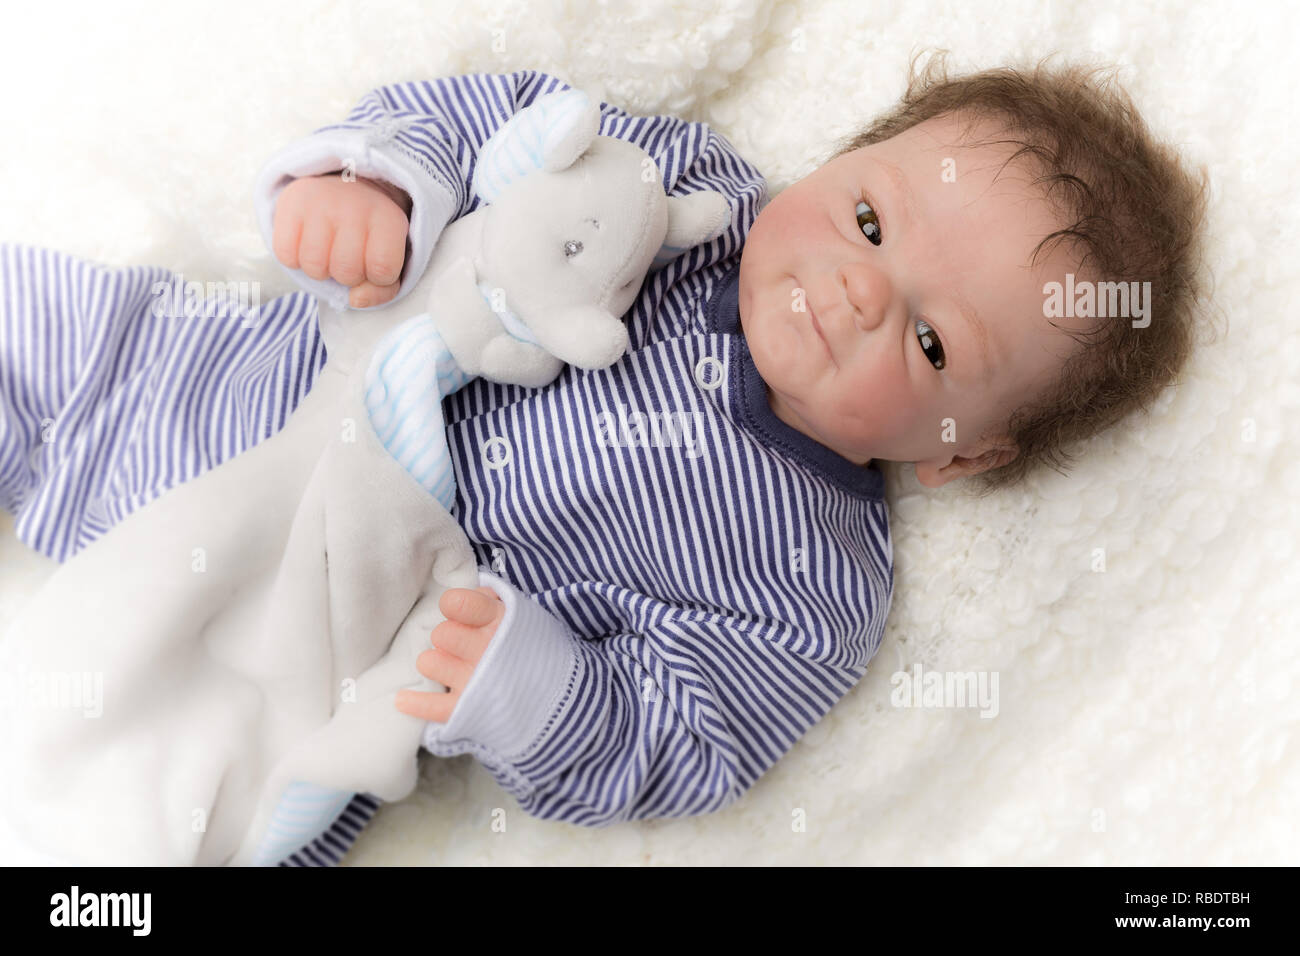 Reborn baby doll. Vinyl sculpt, Coco Malu by Eliza Marx. A reborn is an anatomically correct doll, hand painted to give the appearence of a real baby. Stock Photo